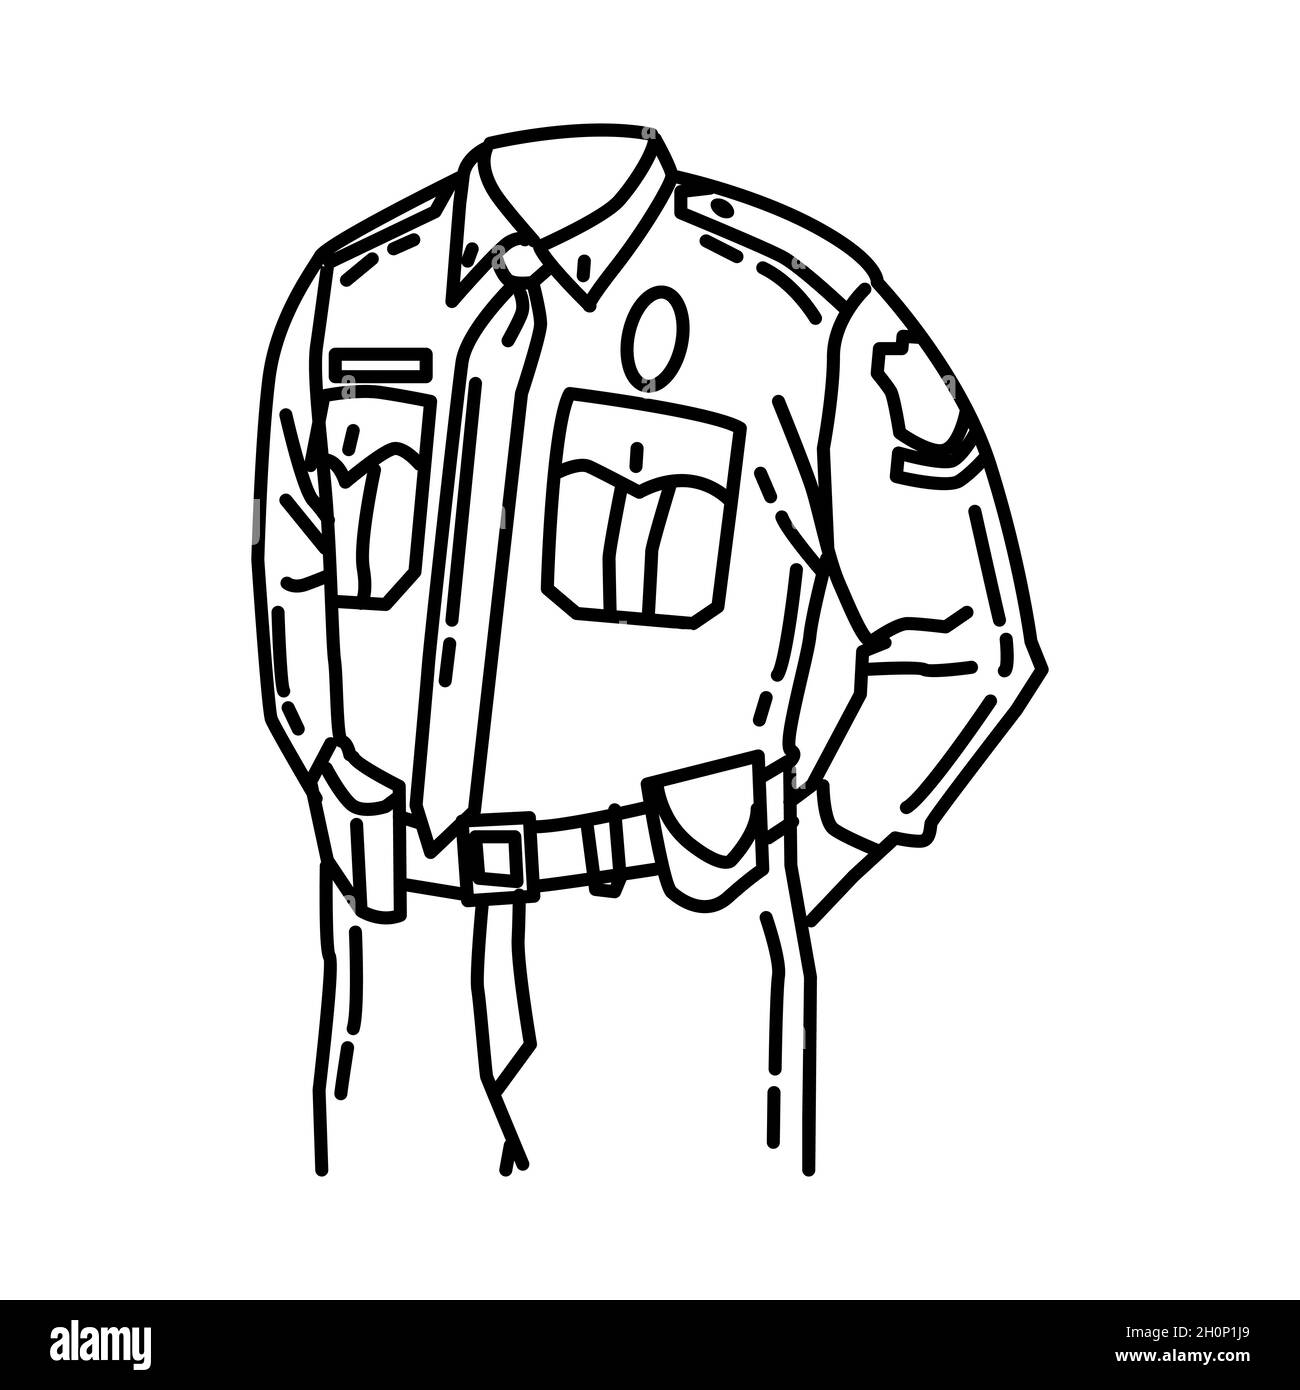 Police Officer Uniform Part of Police Equipment and Accessories Hand Drawn Icon Set Vector. Stock Vector